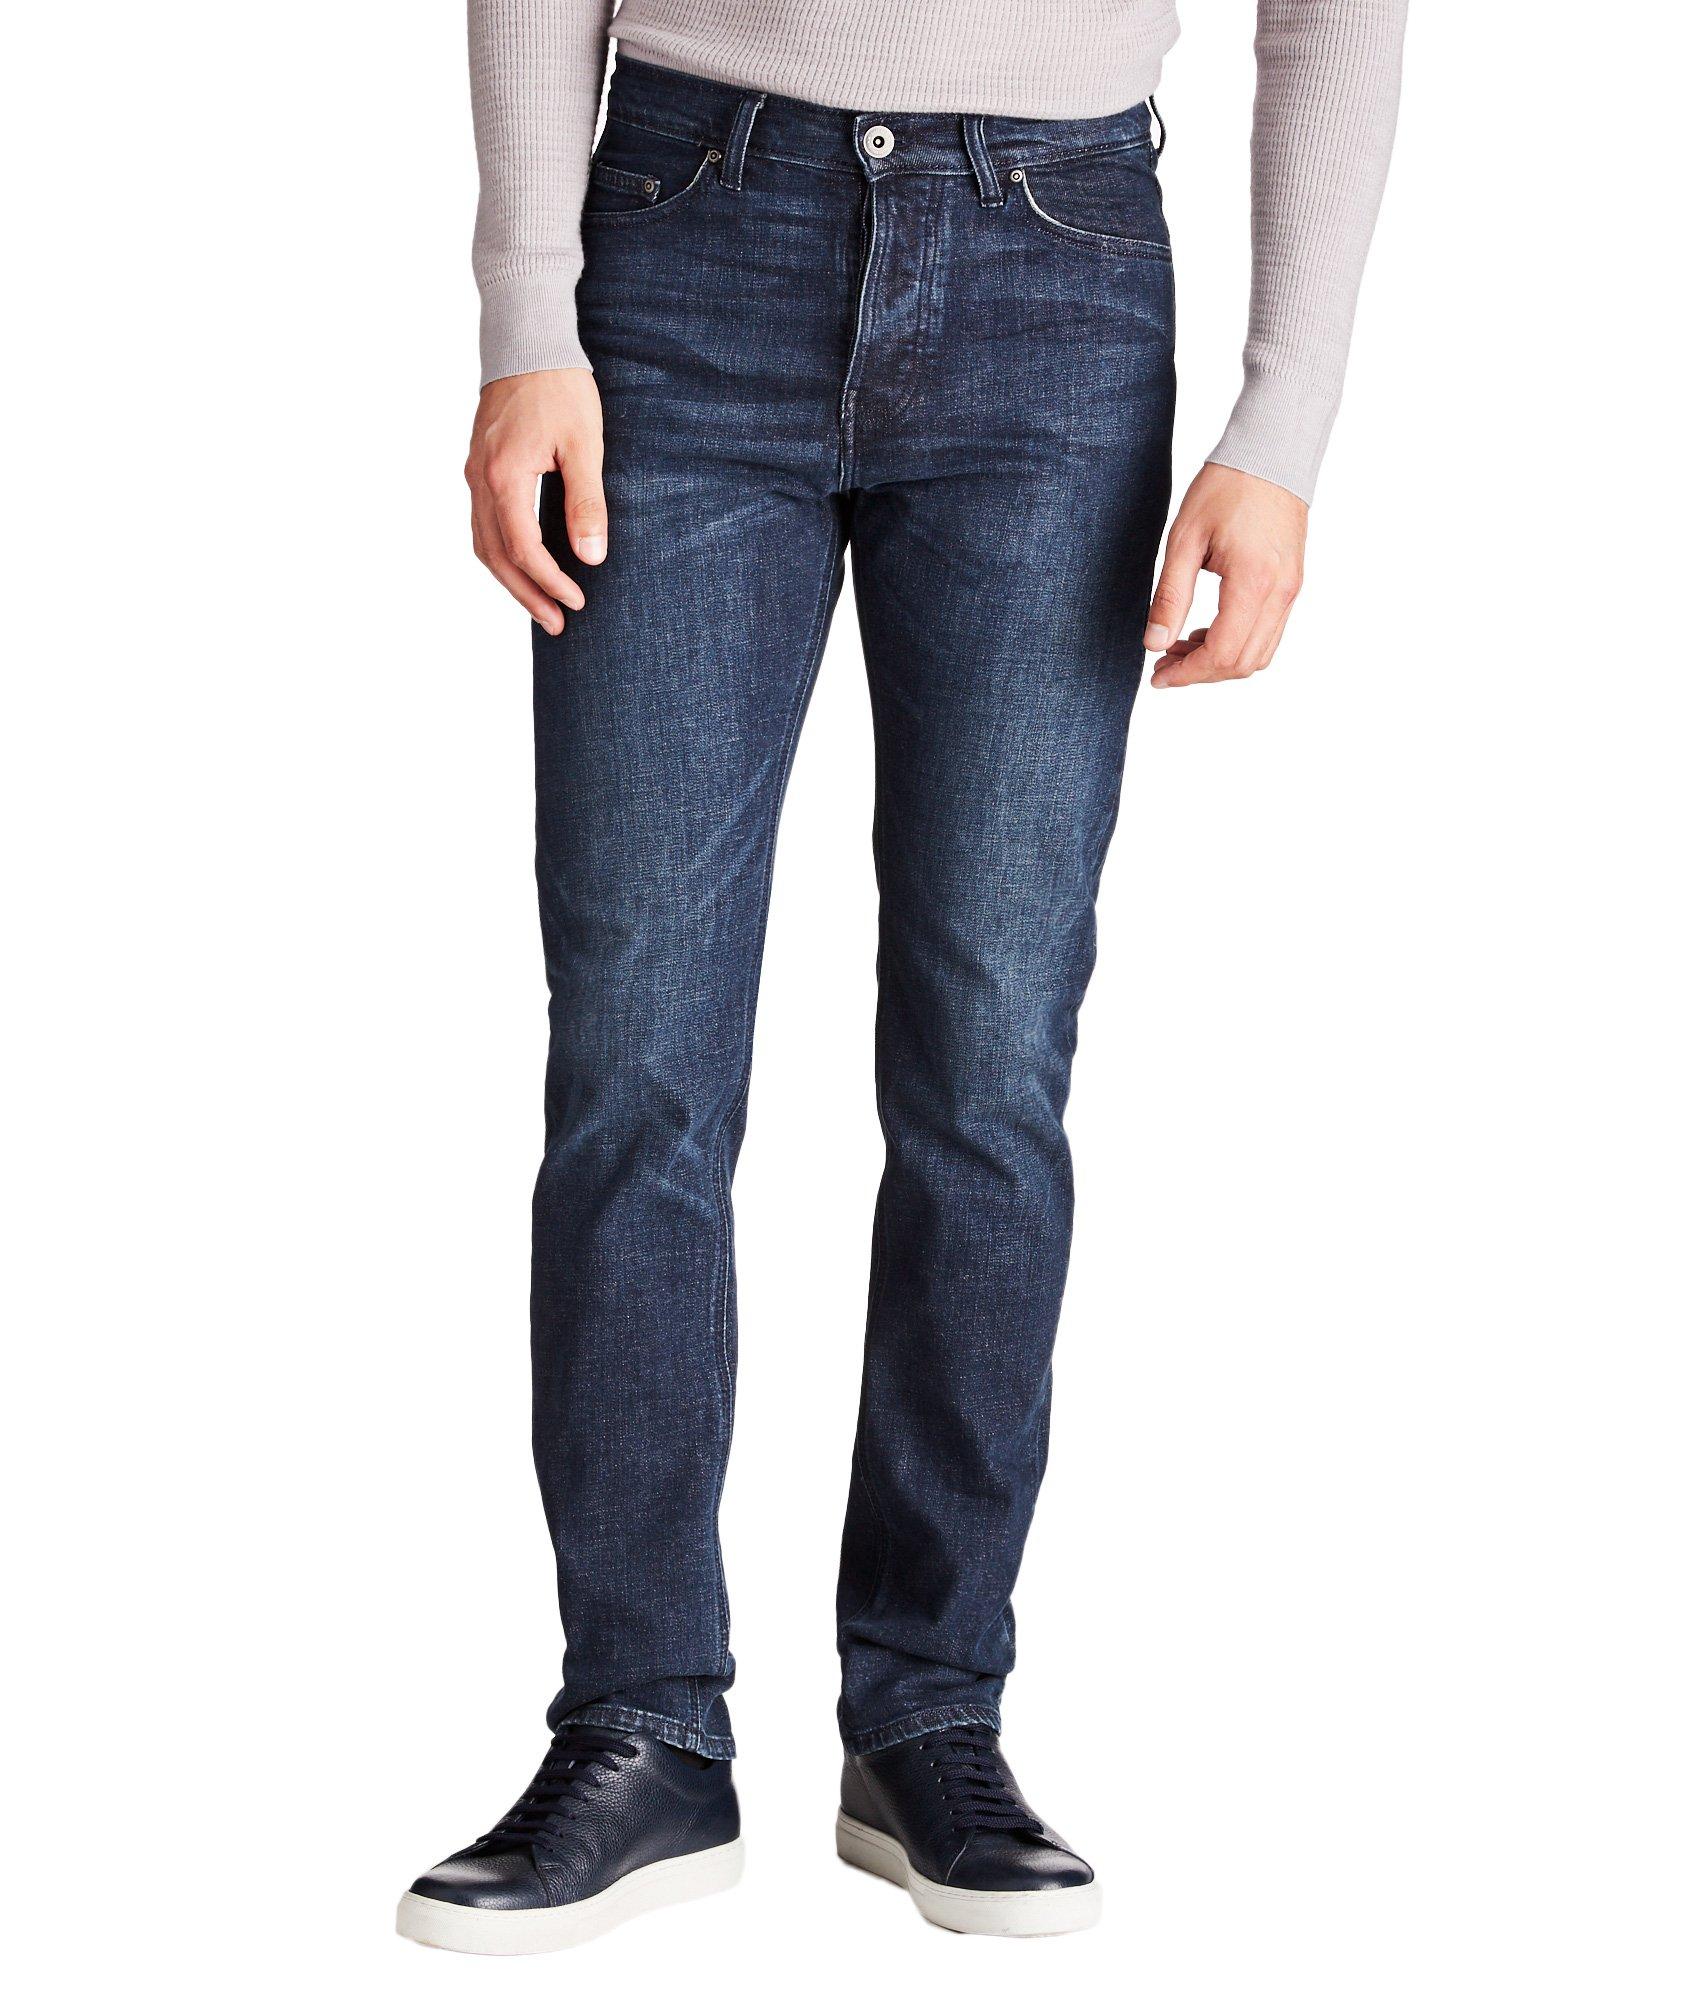 Ranger Straight Fit Jeans image 0